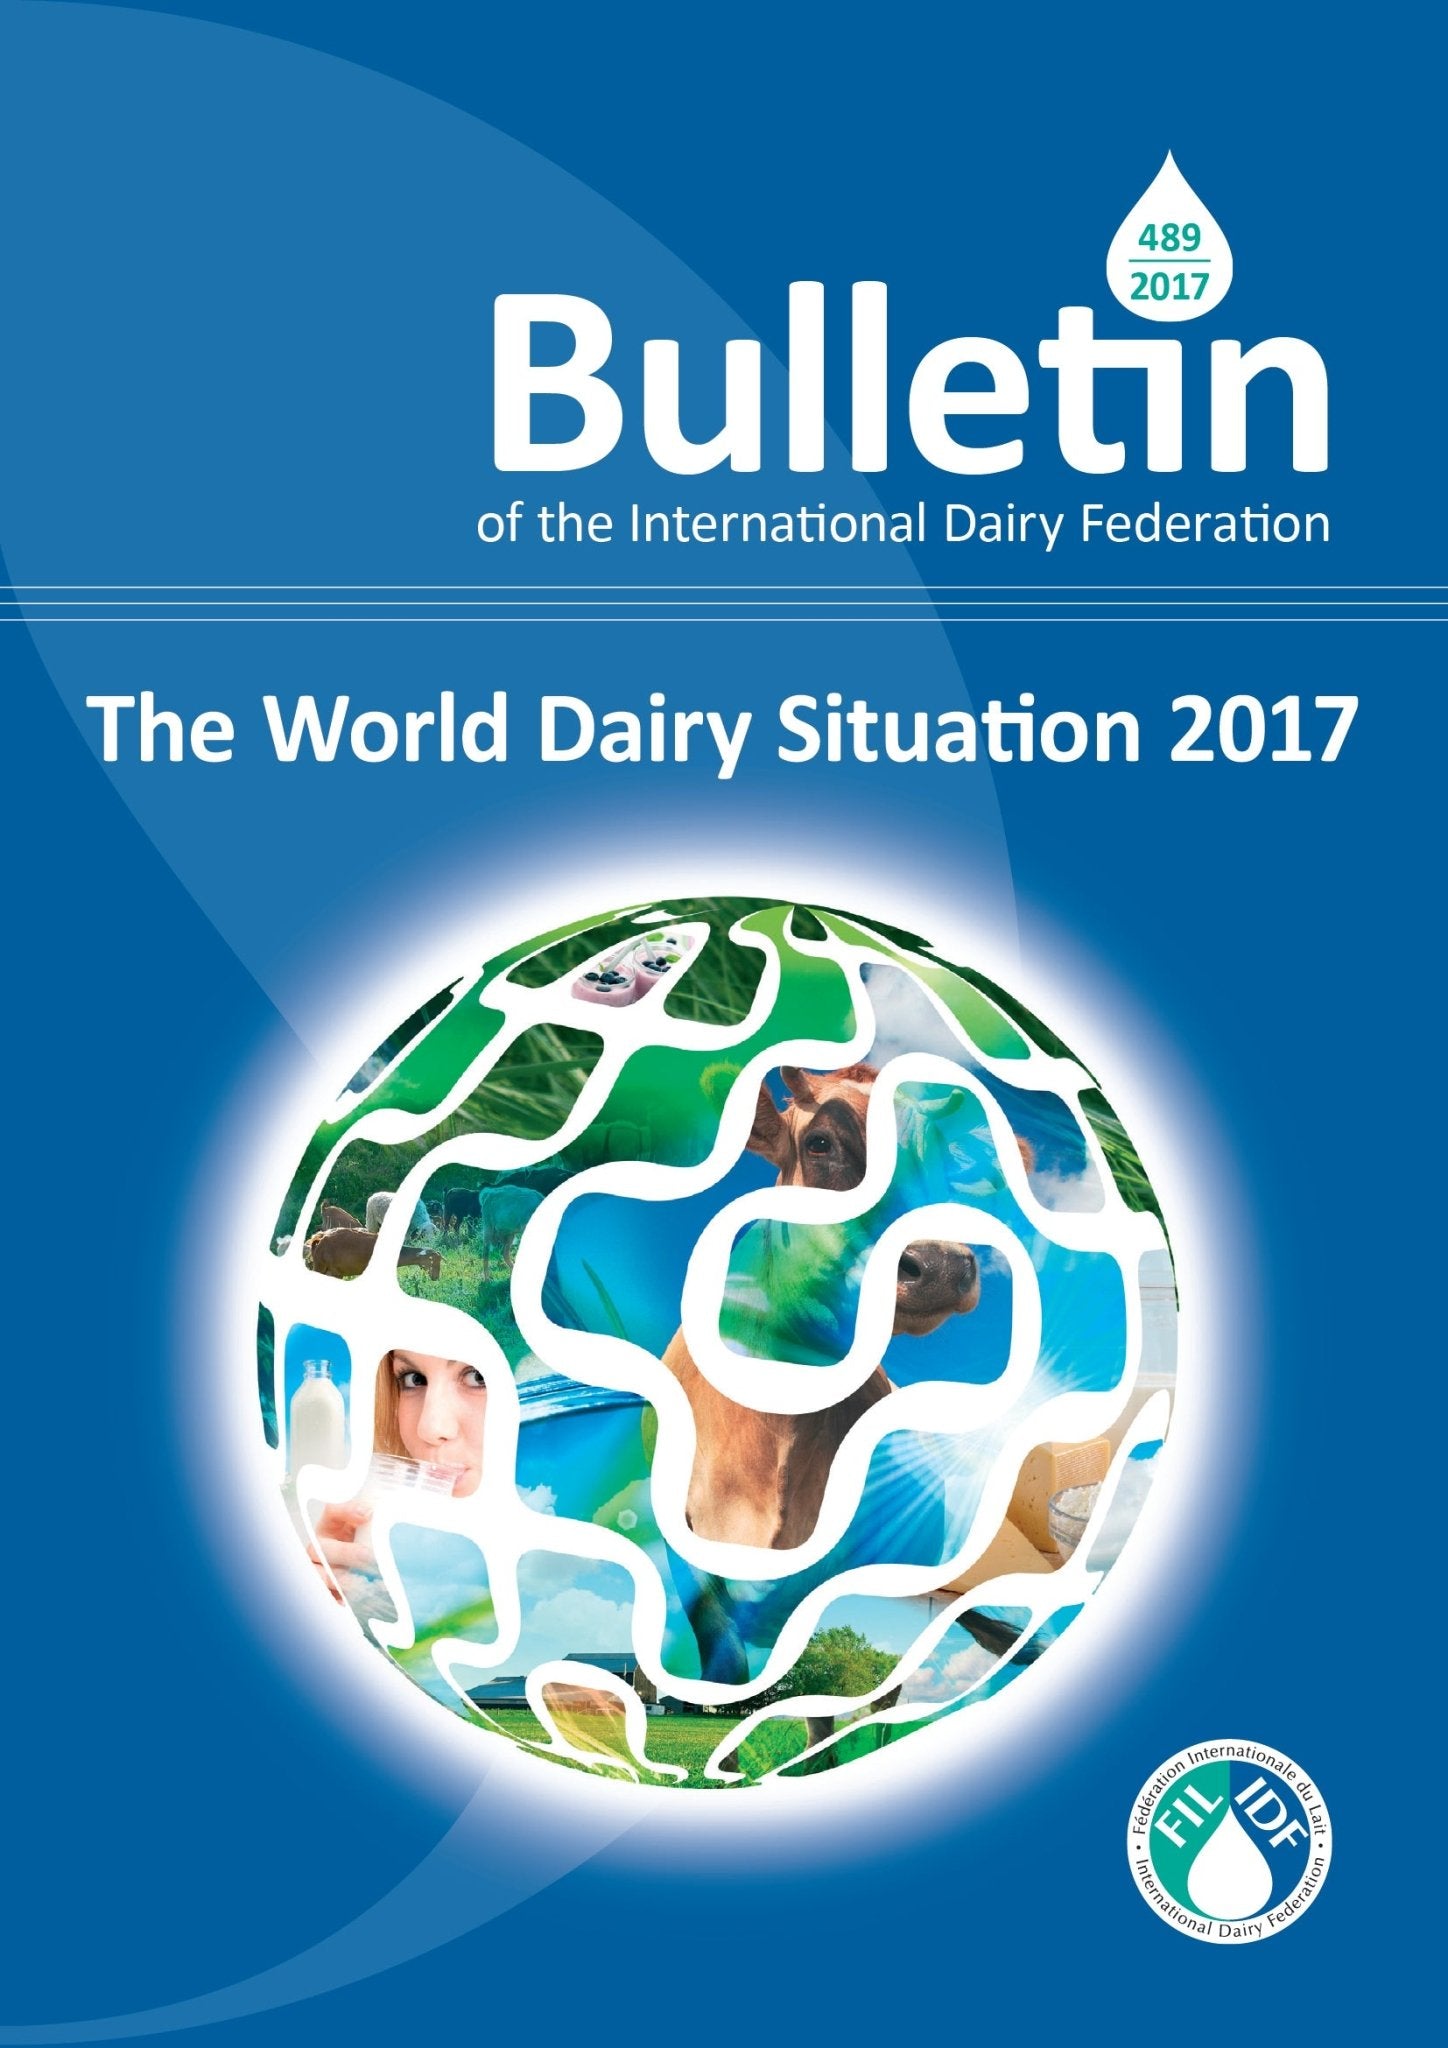 Bulletin of the IDF N° 489/2017: The World Dairy Situation 2017 - FIL-IDF